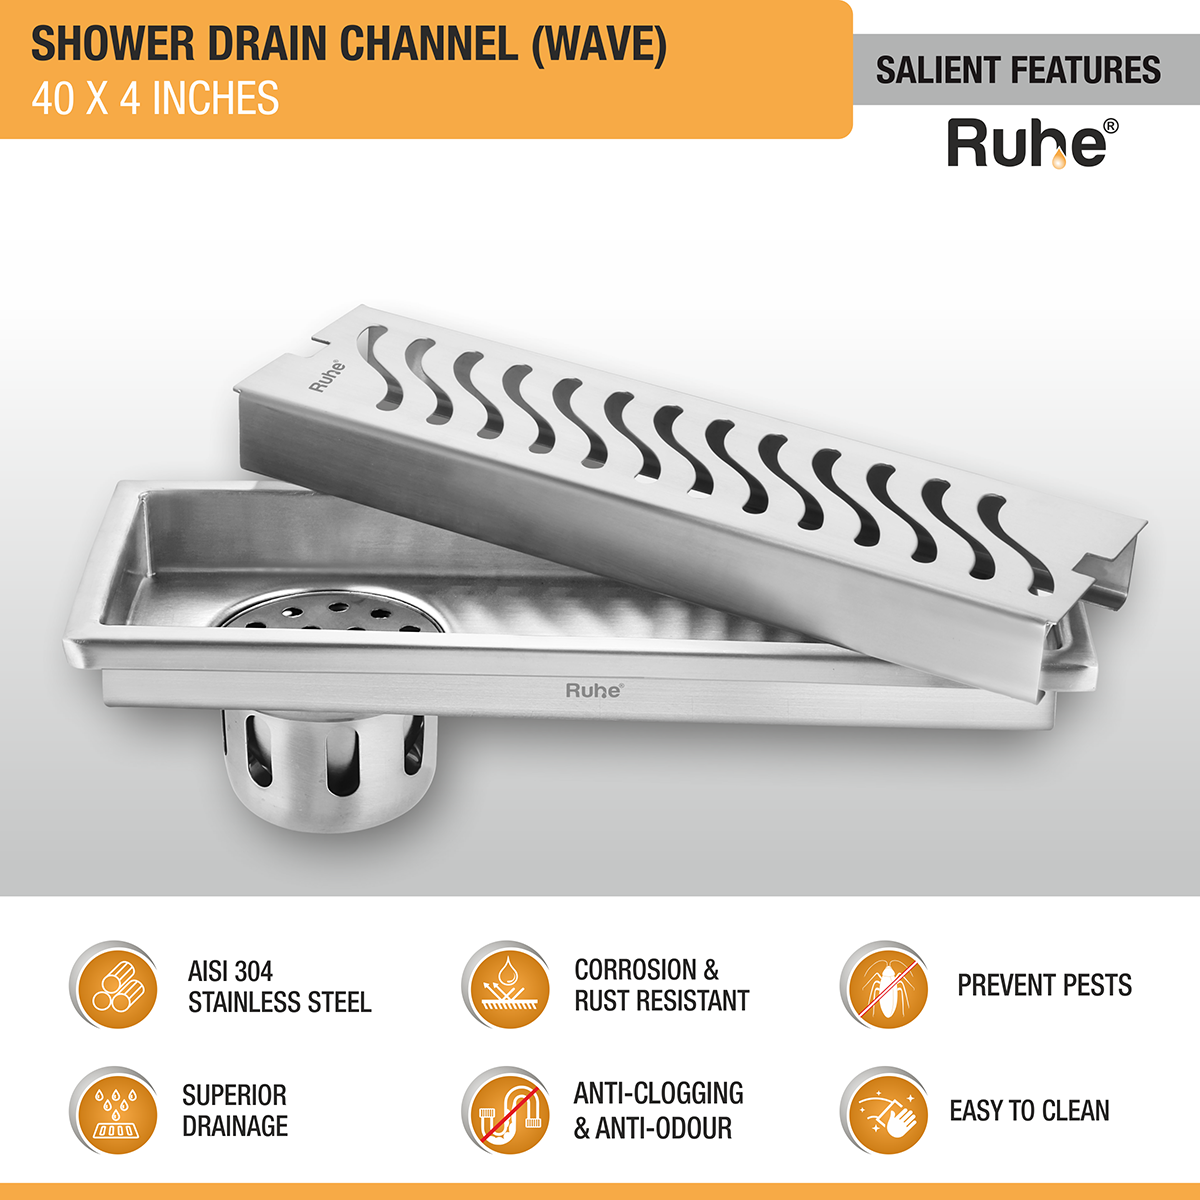 Wave Shower Drain Channel (40 X 4 Inches) with Cockroach Trap (304 Grade) features